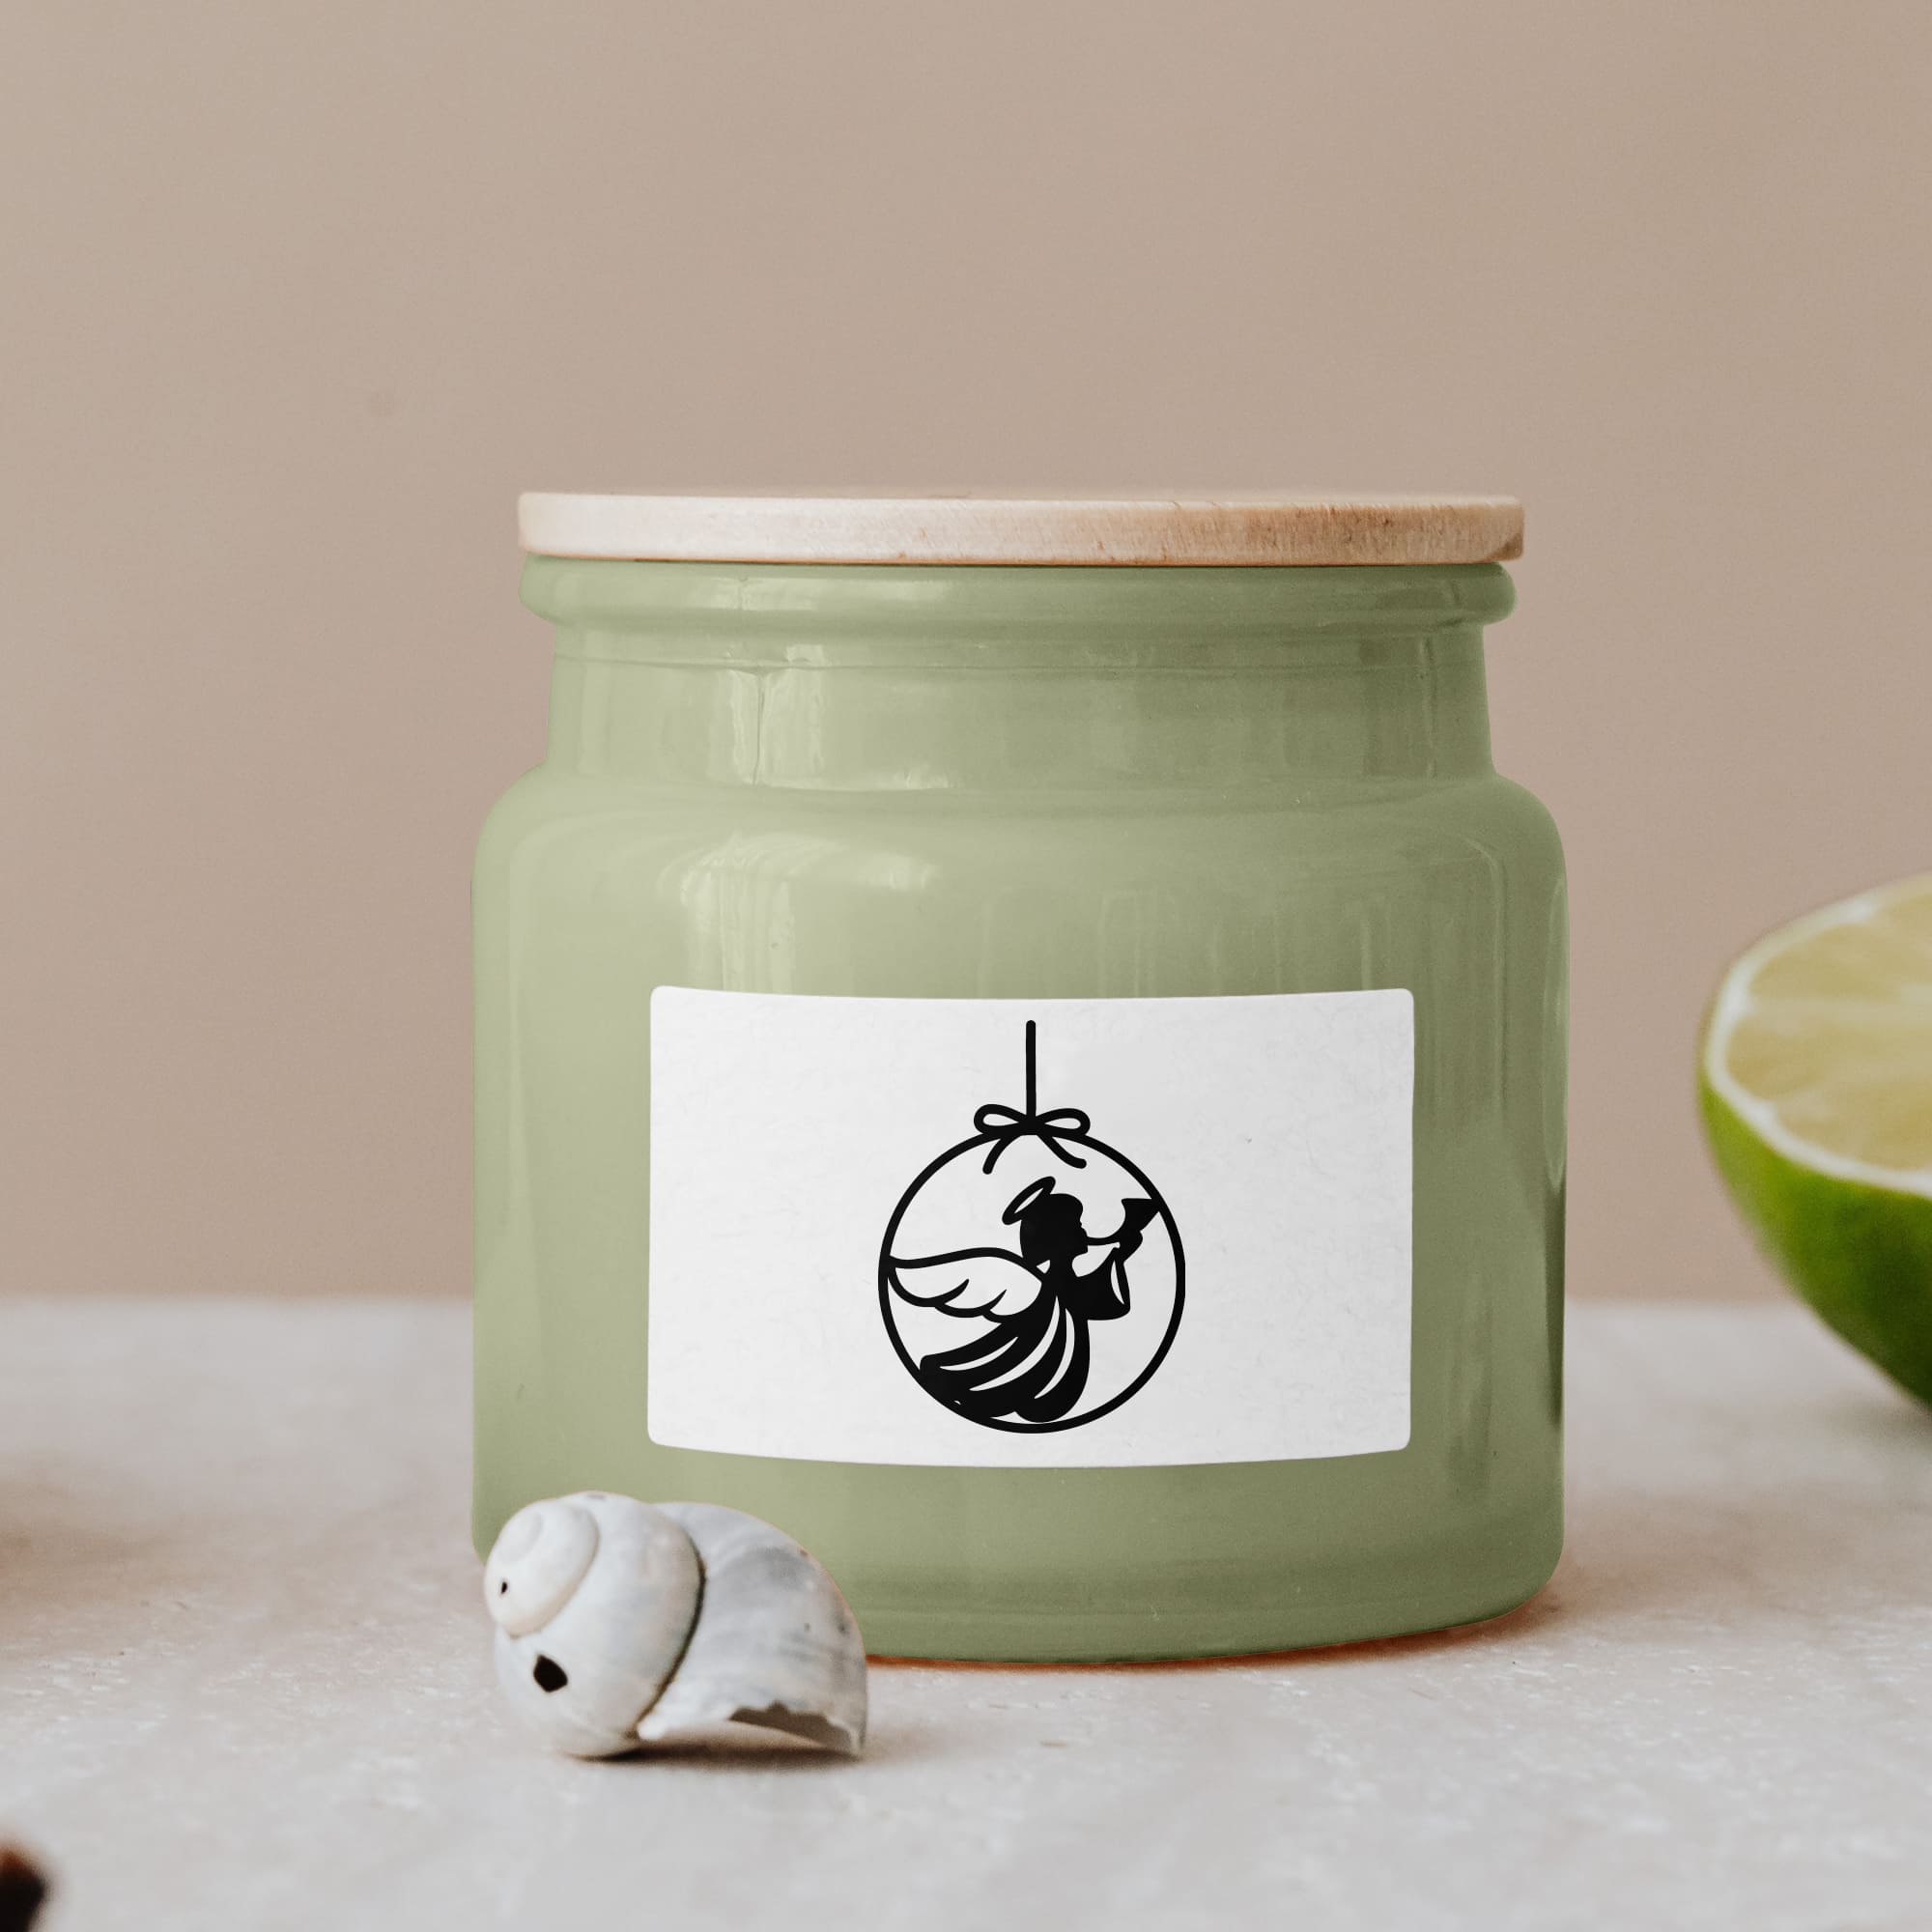 Black christmas illustration on green glass jar with wooden lid.